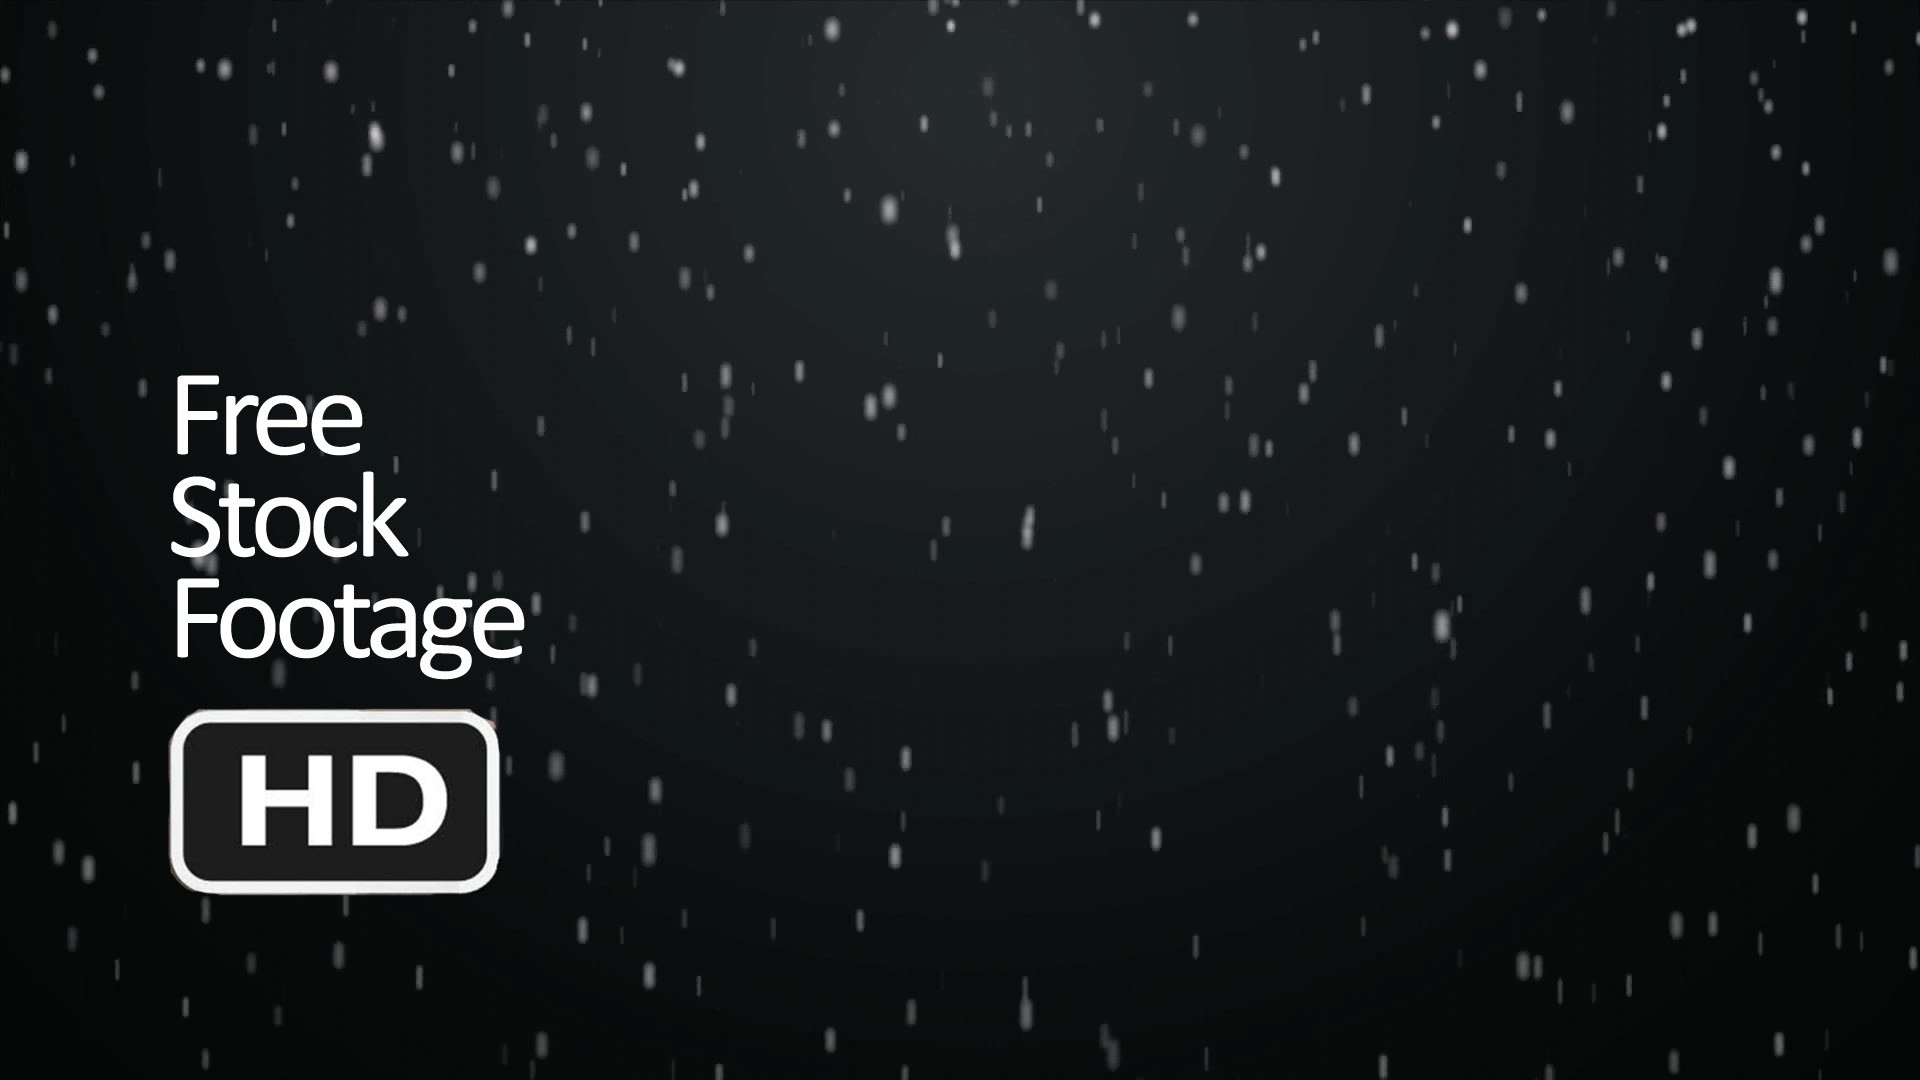 1920x1080 Free Stock Video Footage - Snowfall (Black background) HD 1080 - YouTube